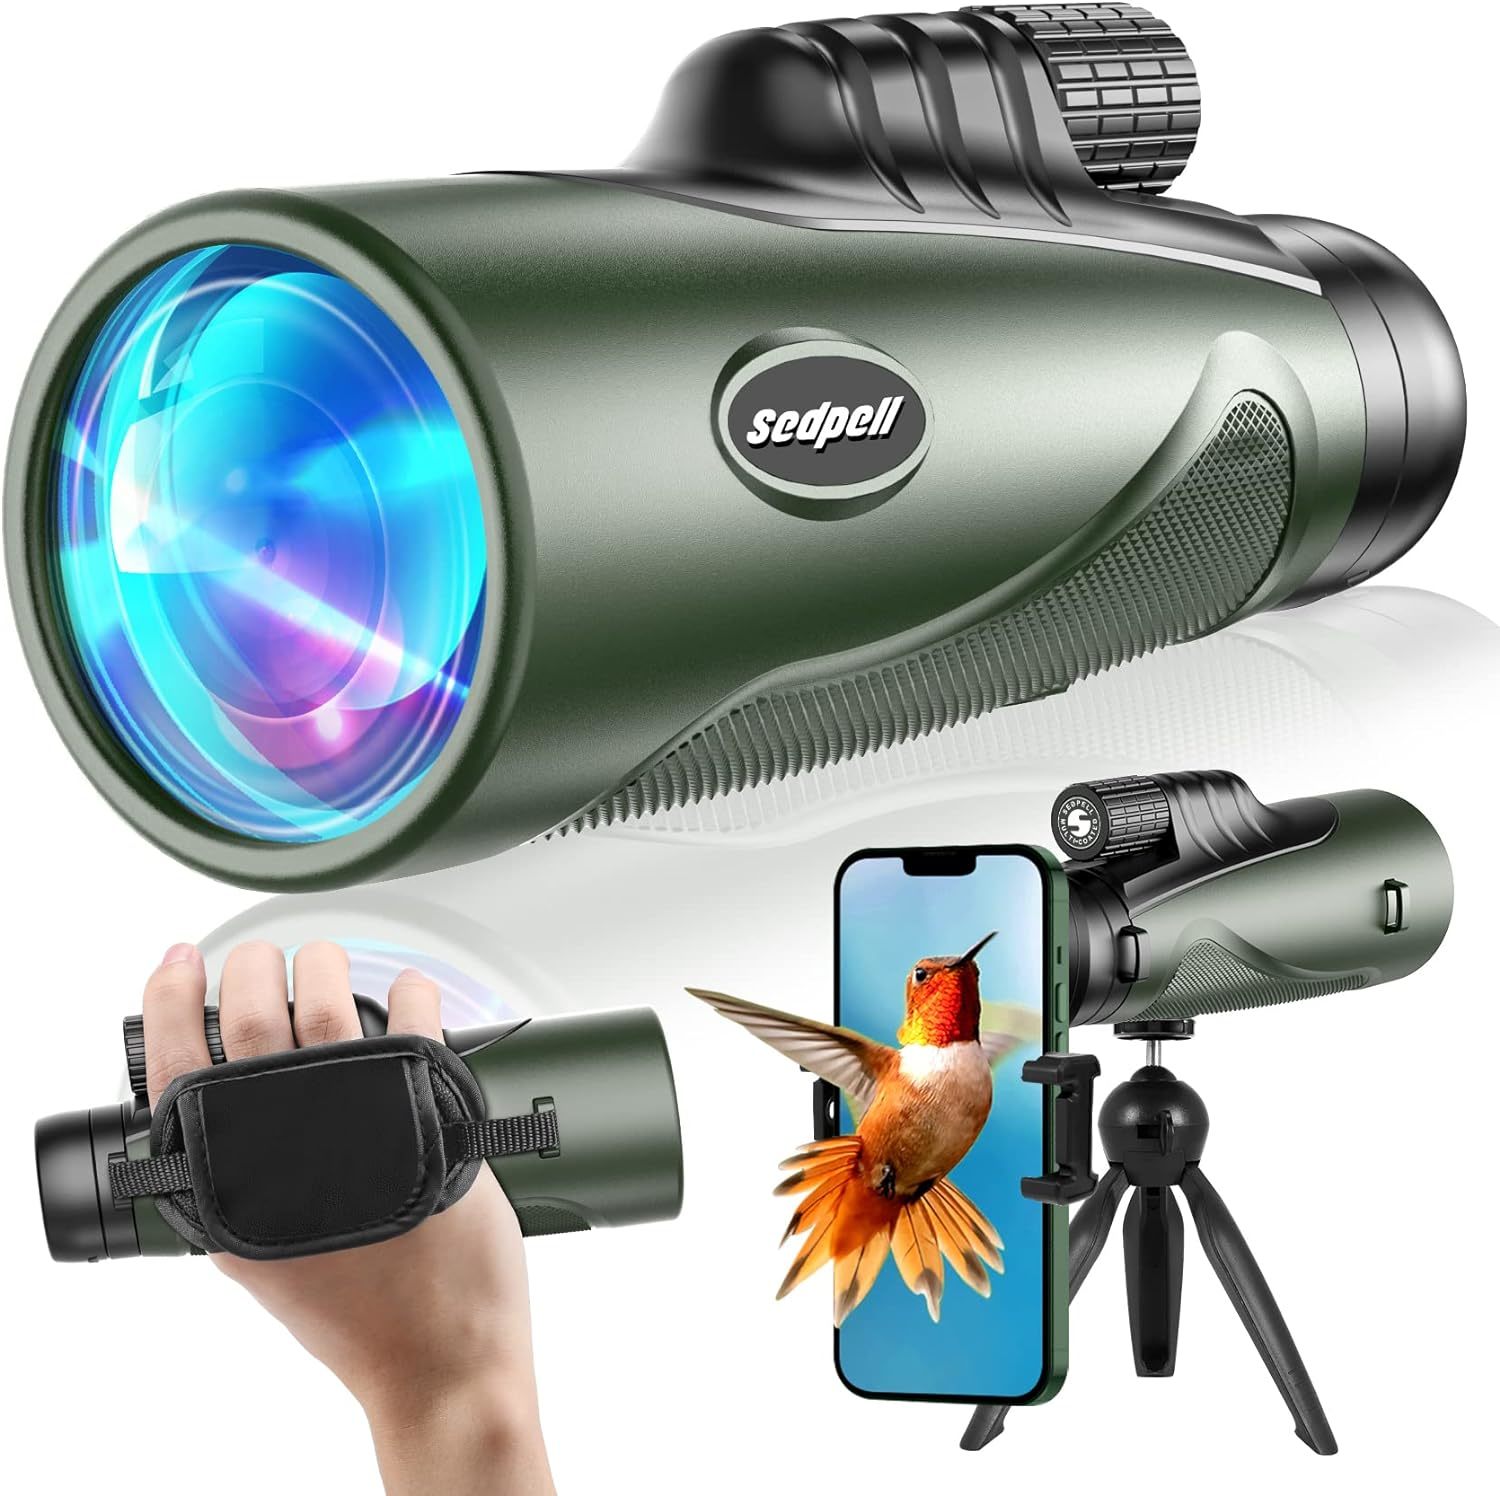 Primary image for Sedpell 1256 Hd Monocular Telescope With Smartphone Adapter, High Power Adult